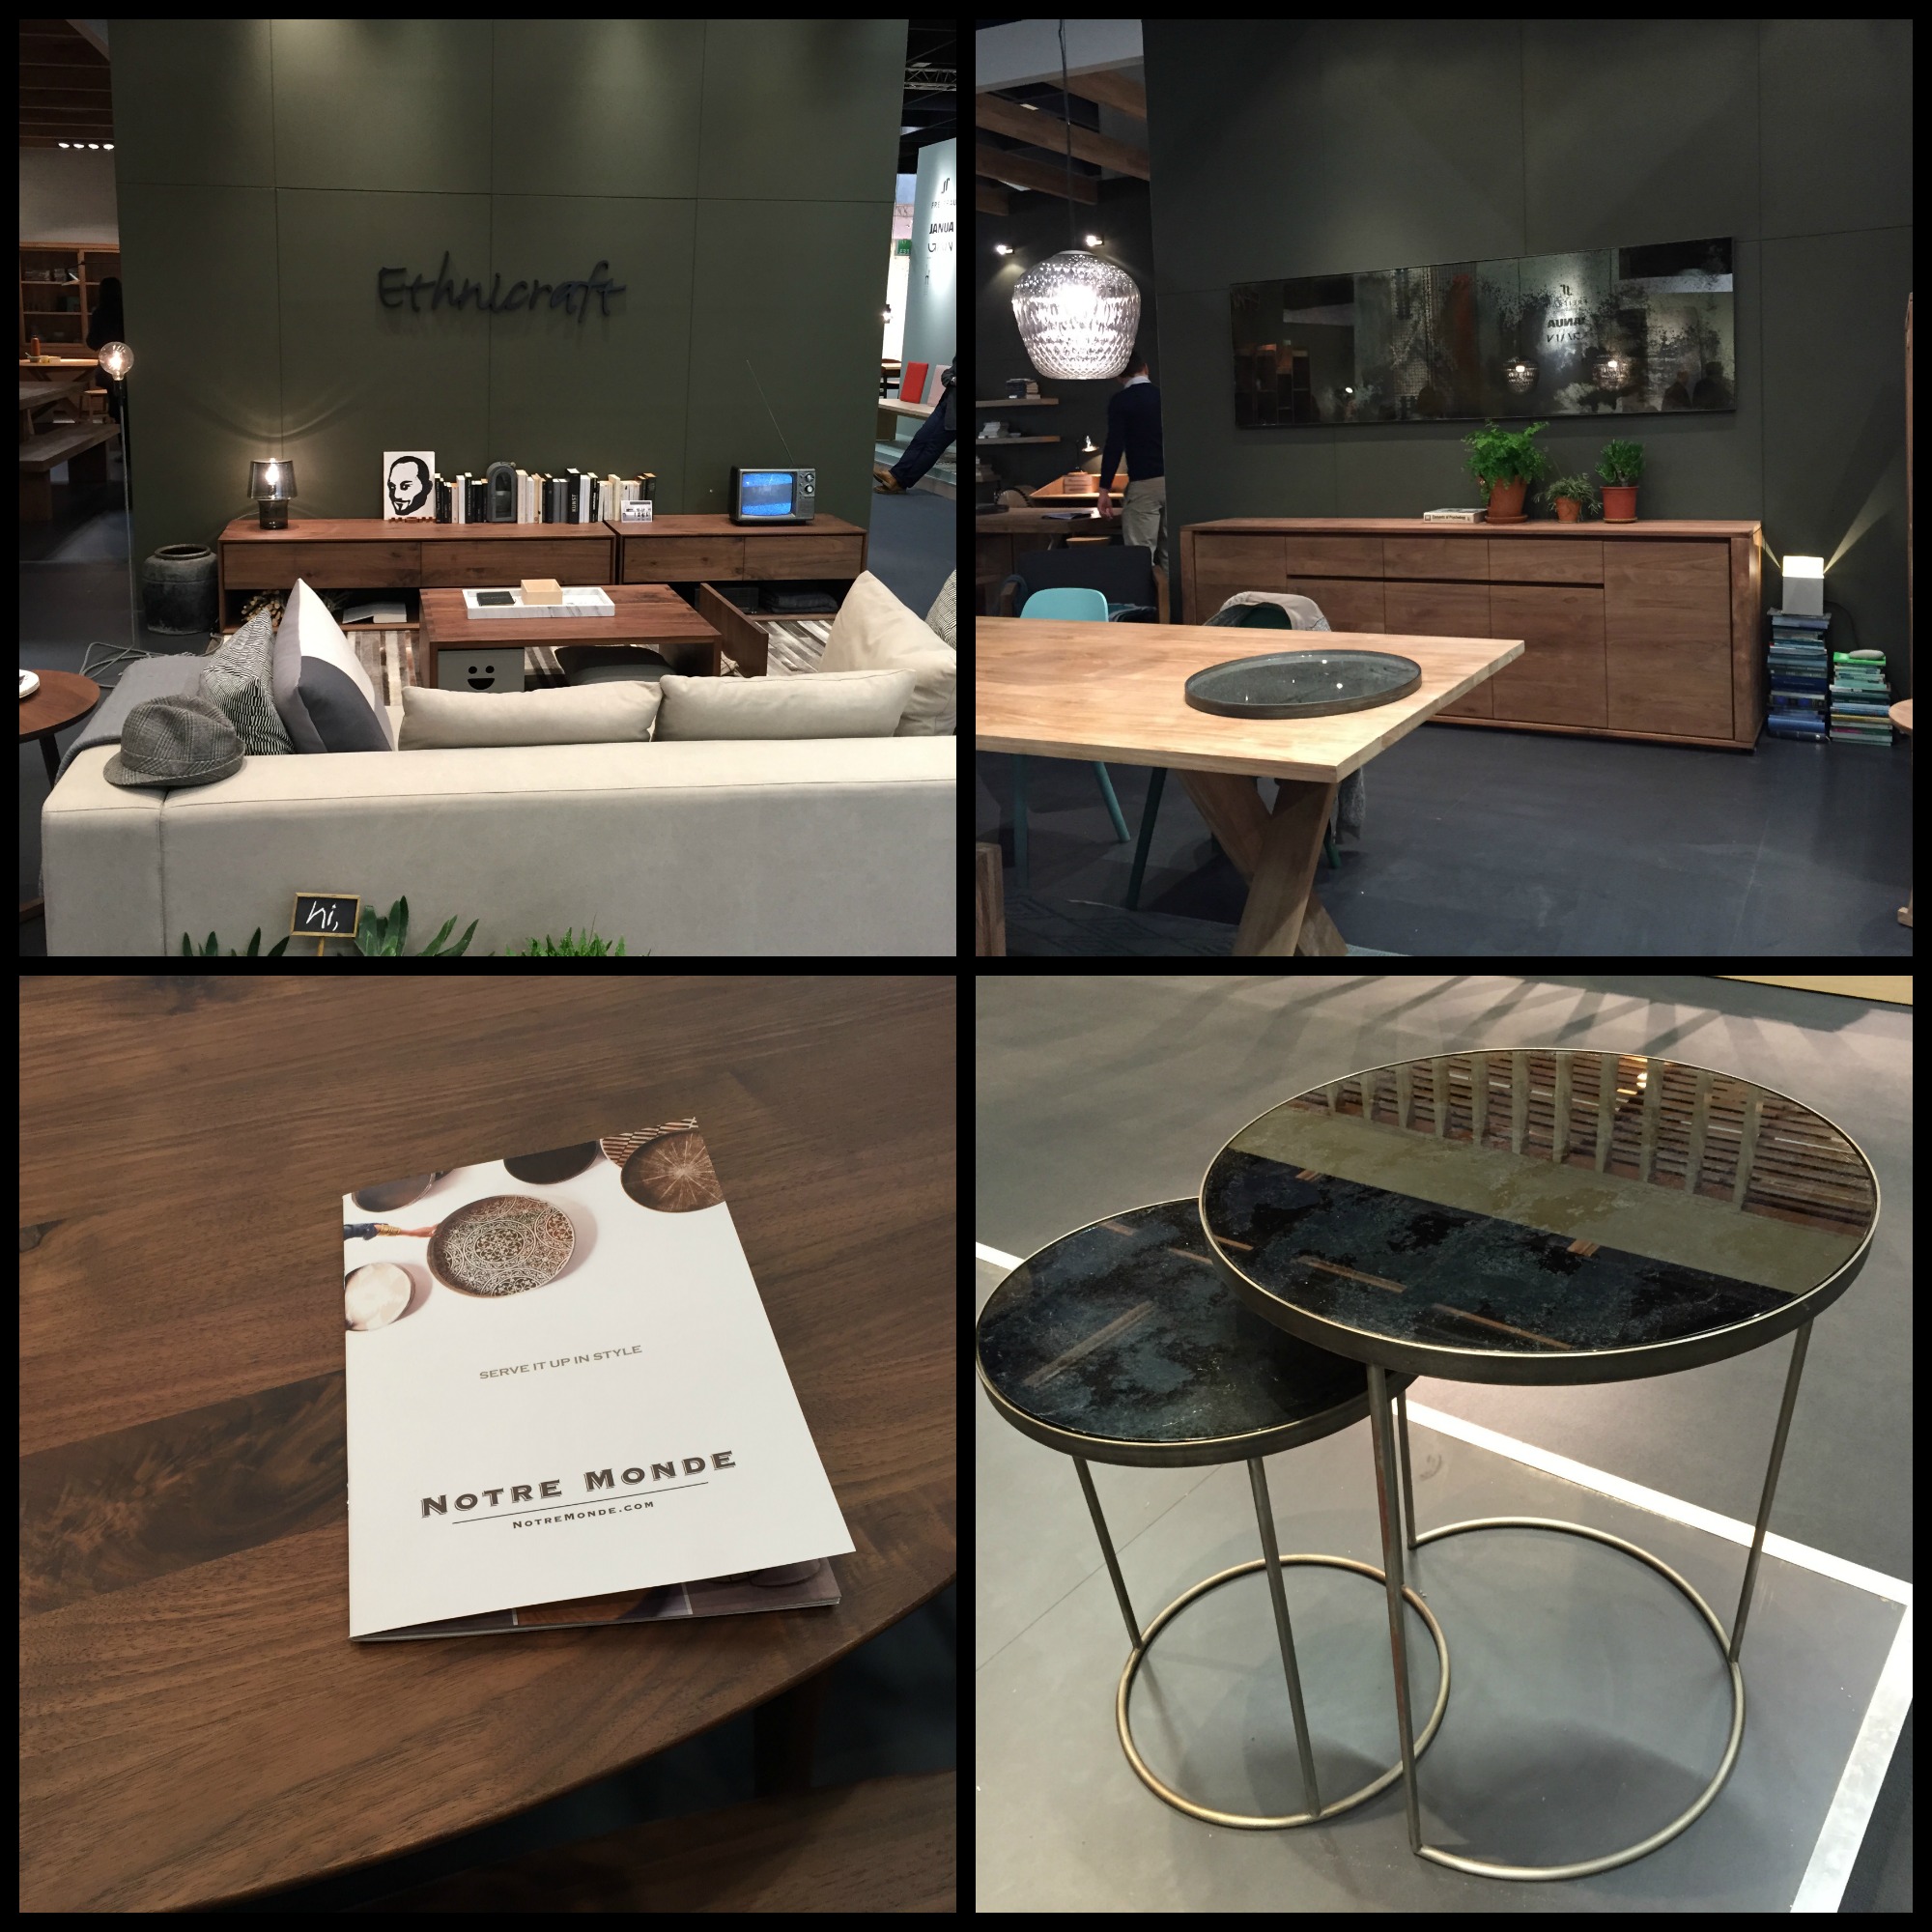 Ethnicraft and Notre Monde - Imm Cologne 2015